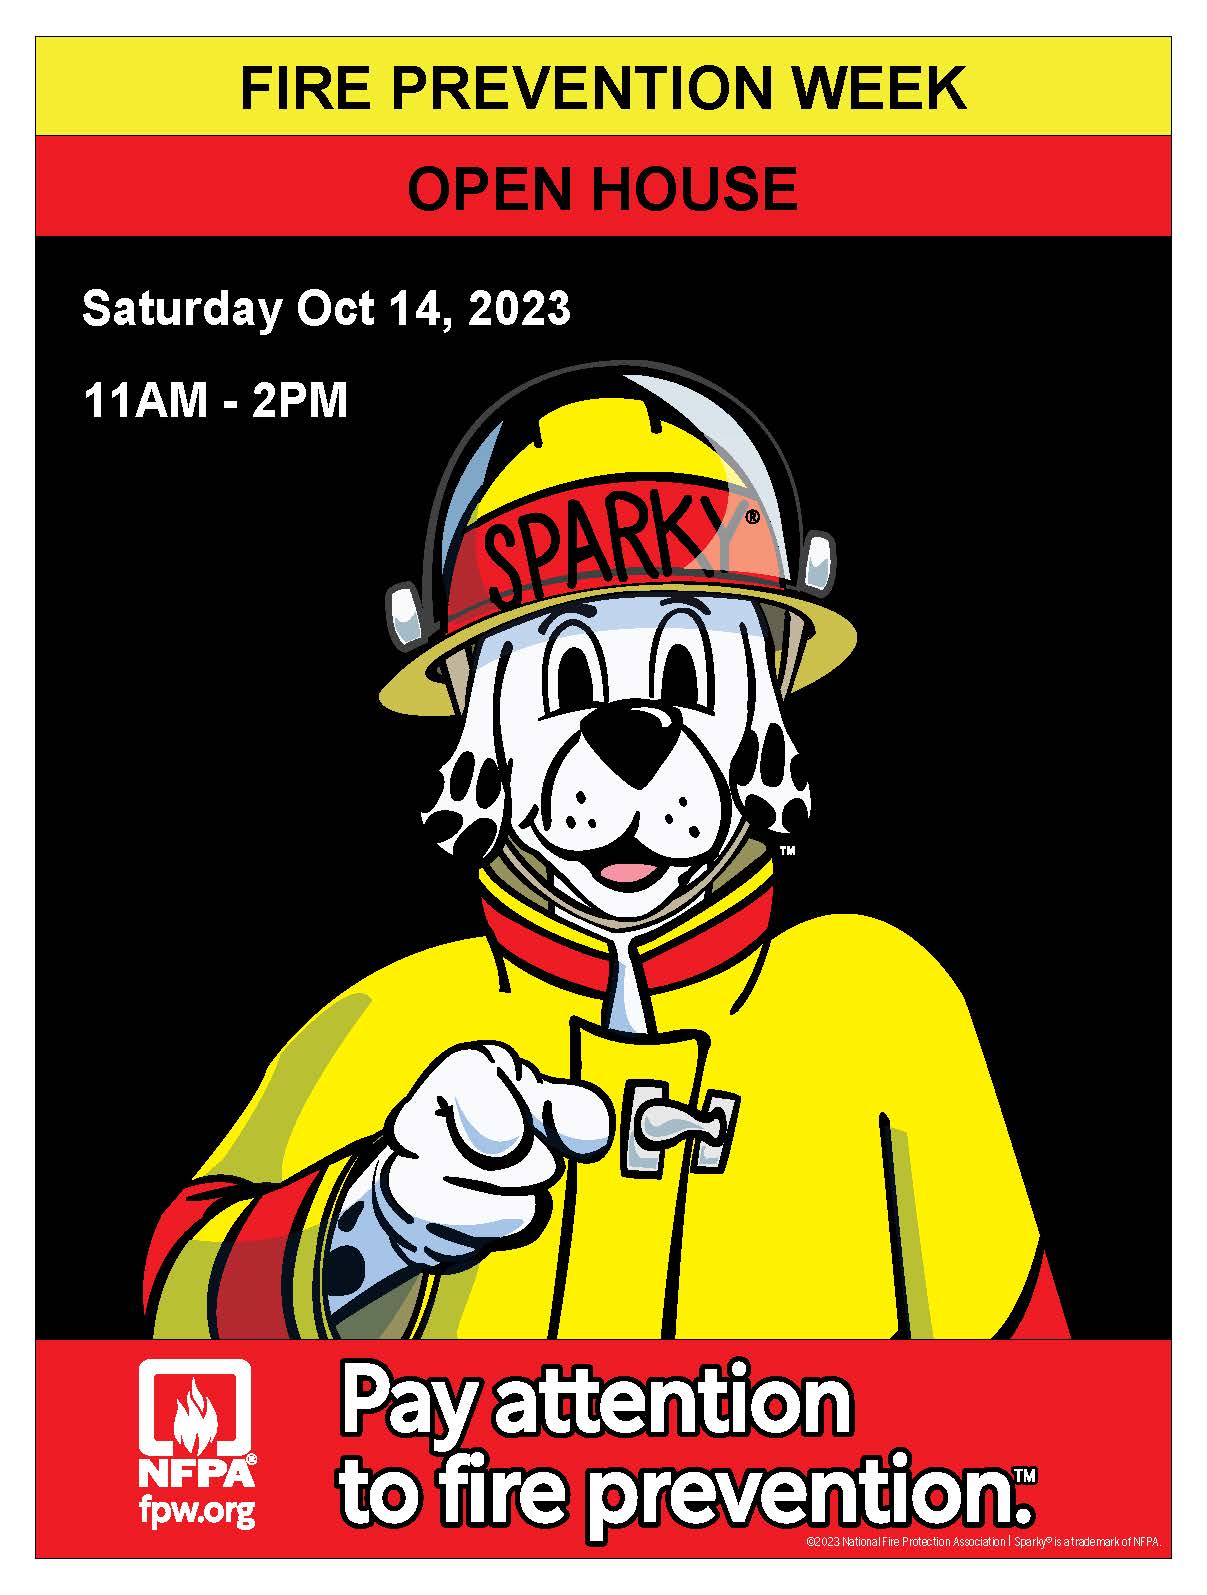 sparky the fire dog invites you to an open house